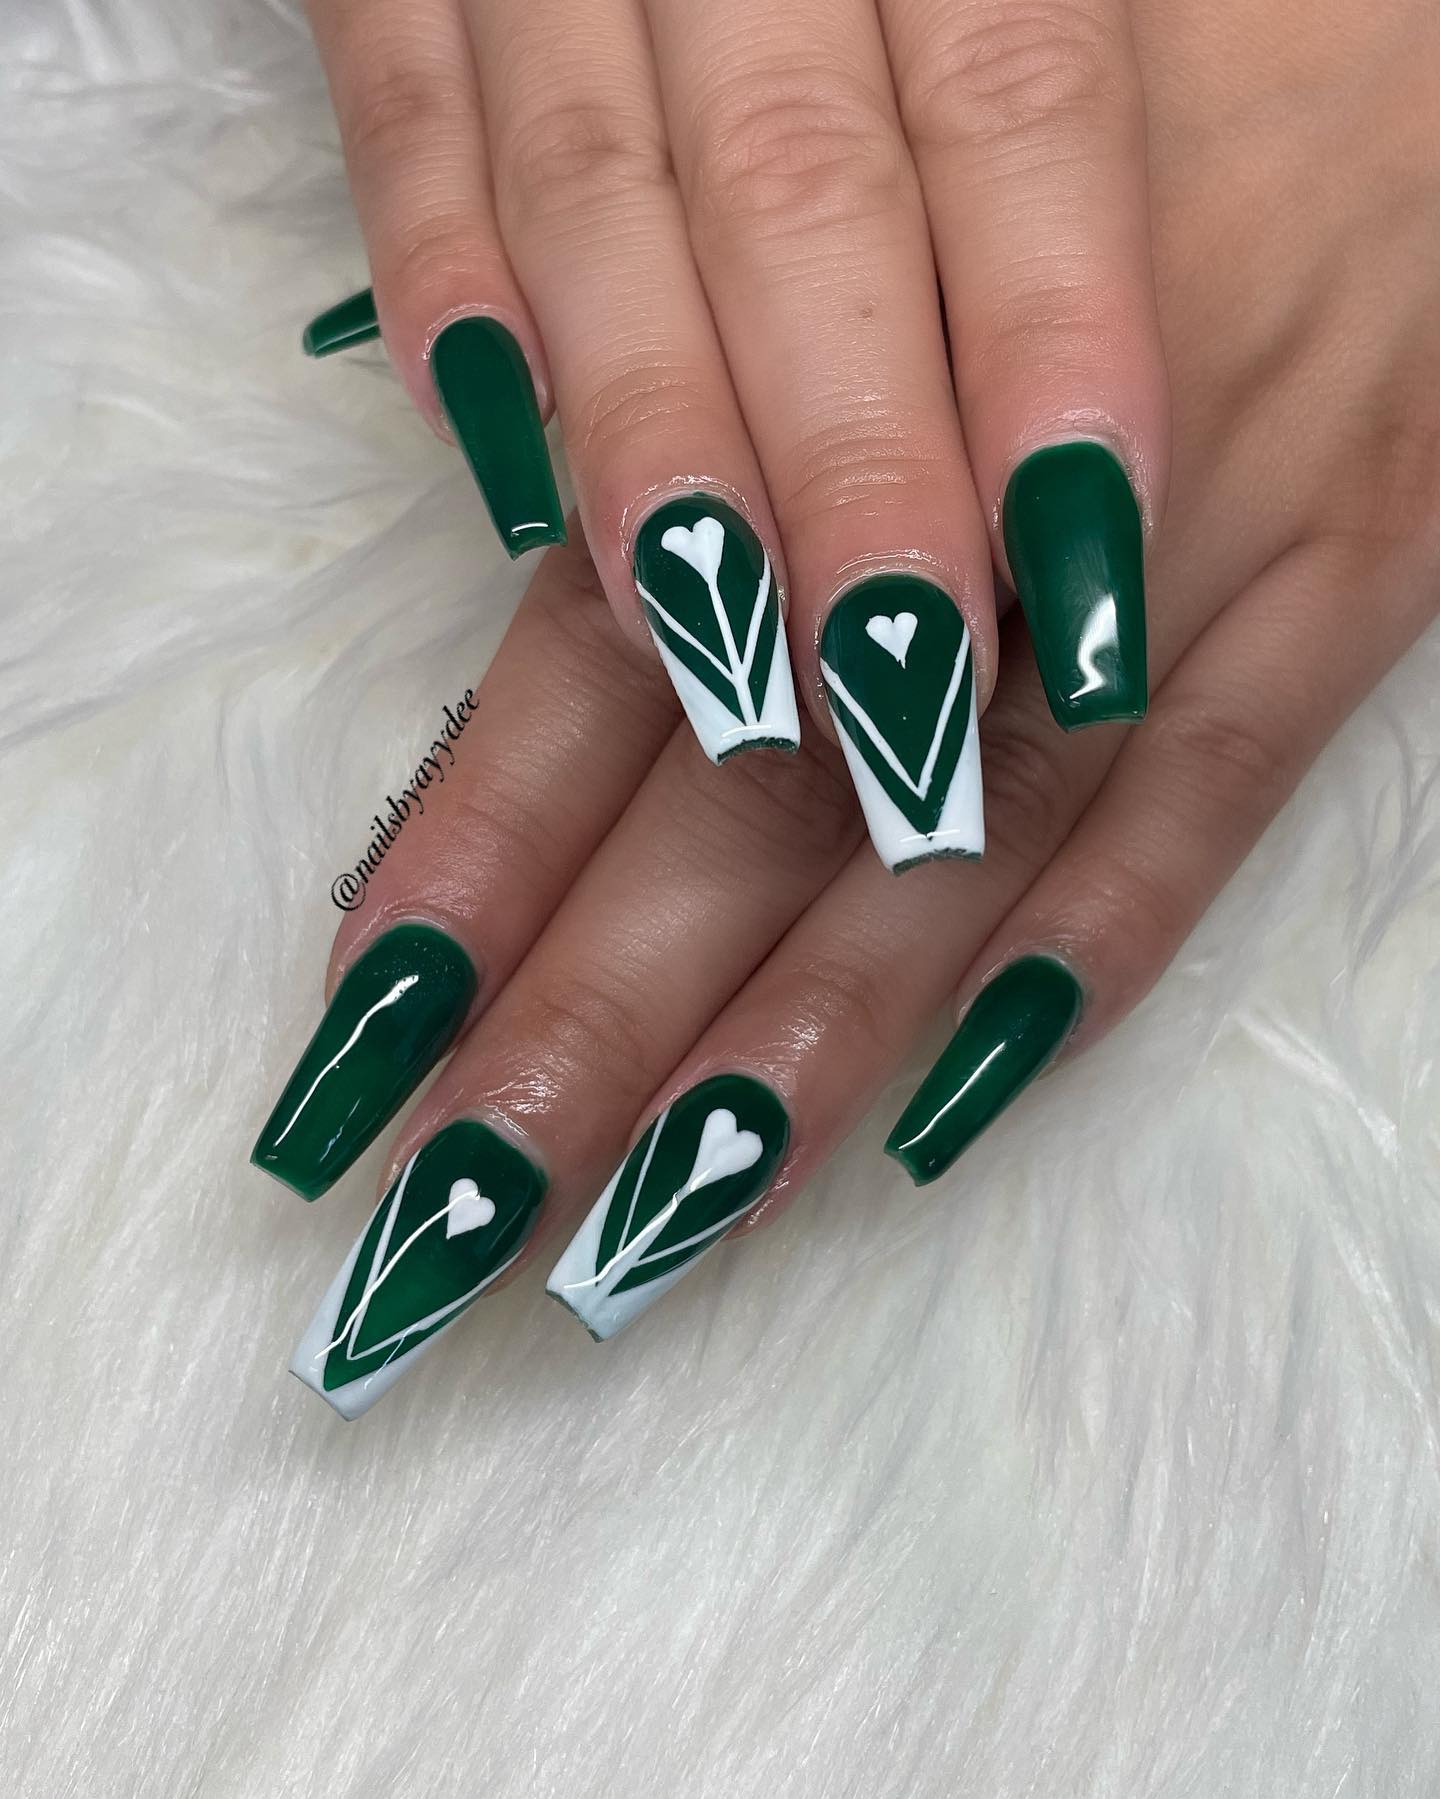 Isn't dark green a classy color? With this classy color, you can make your nails look more amazing by using white nail art.